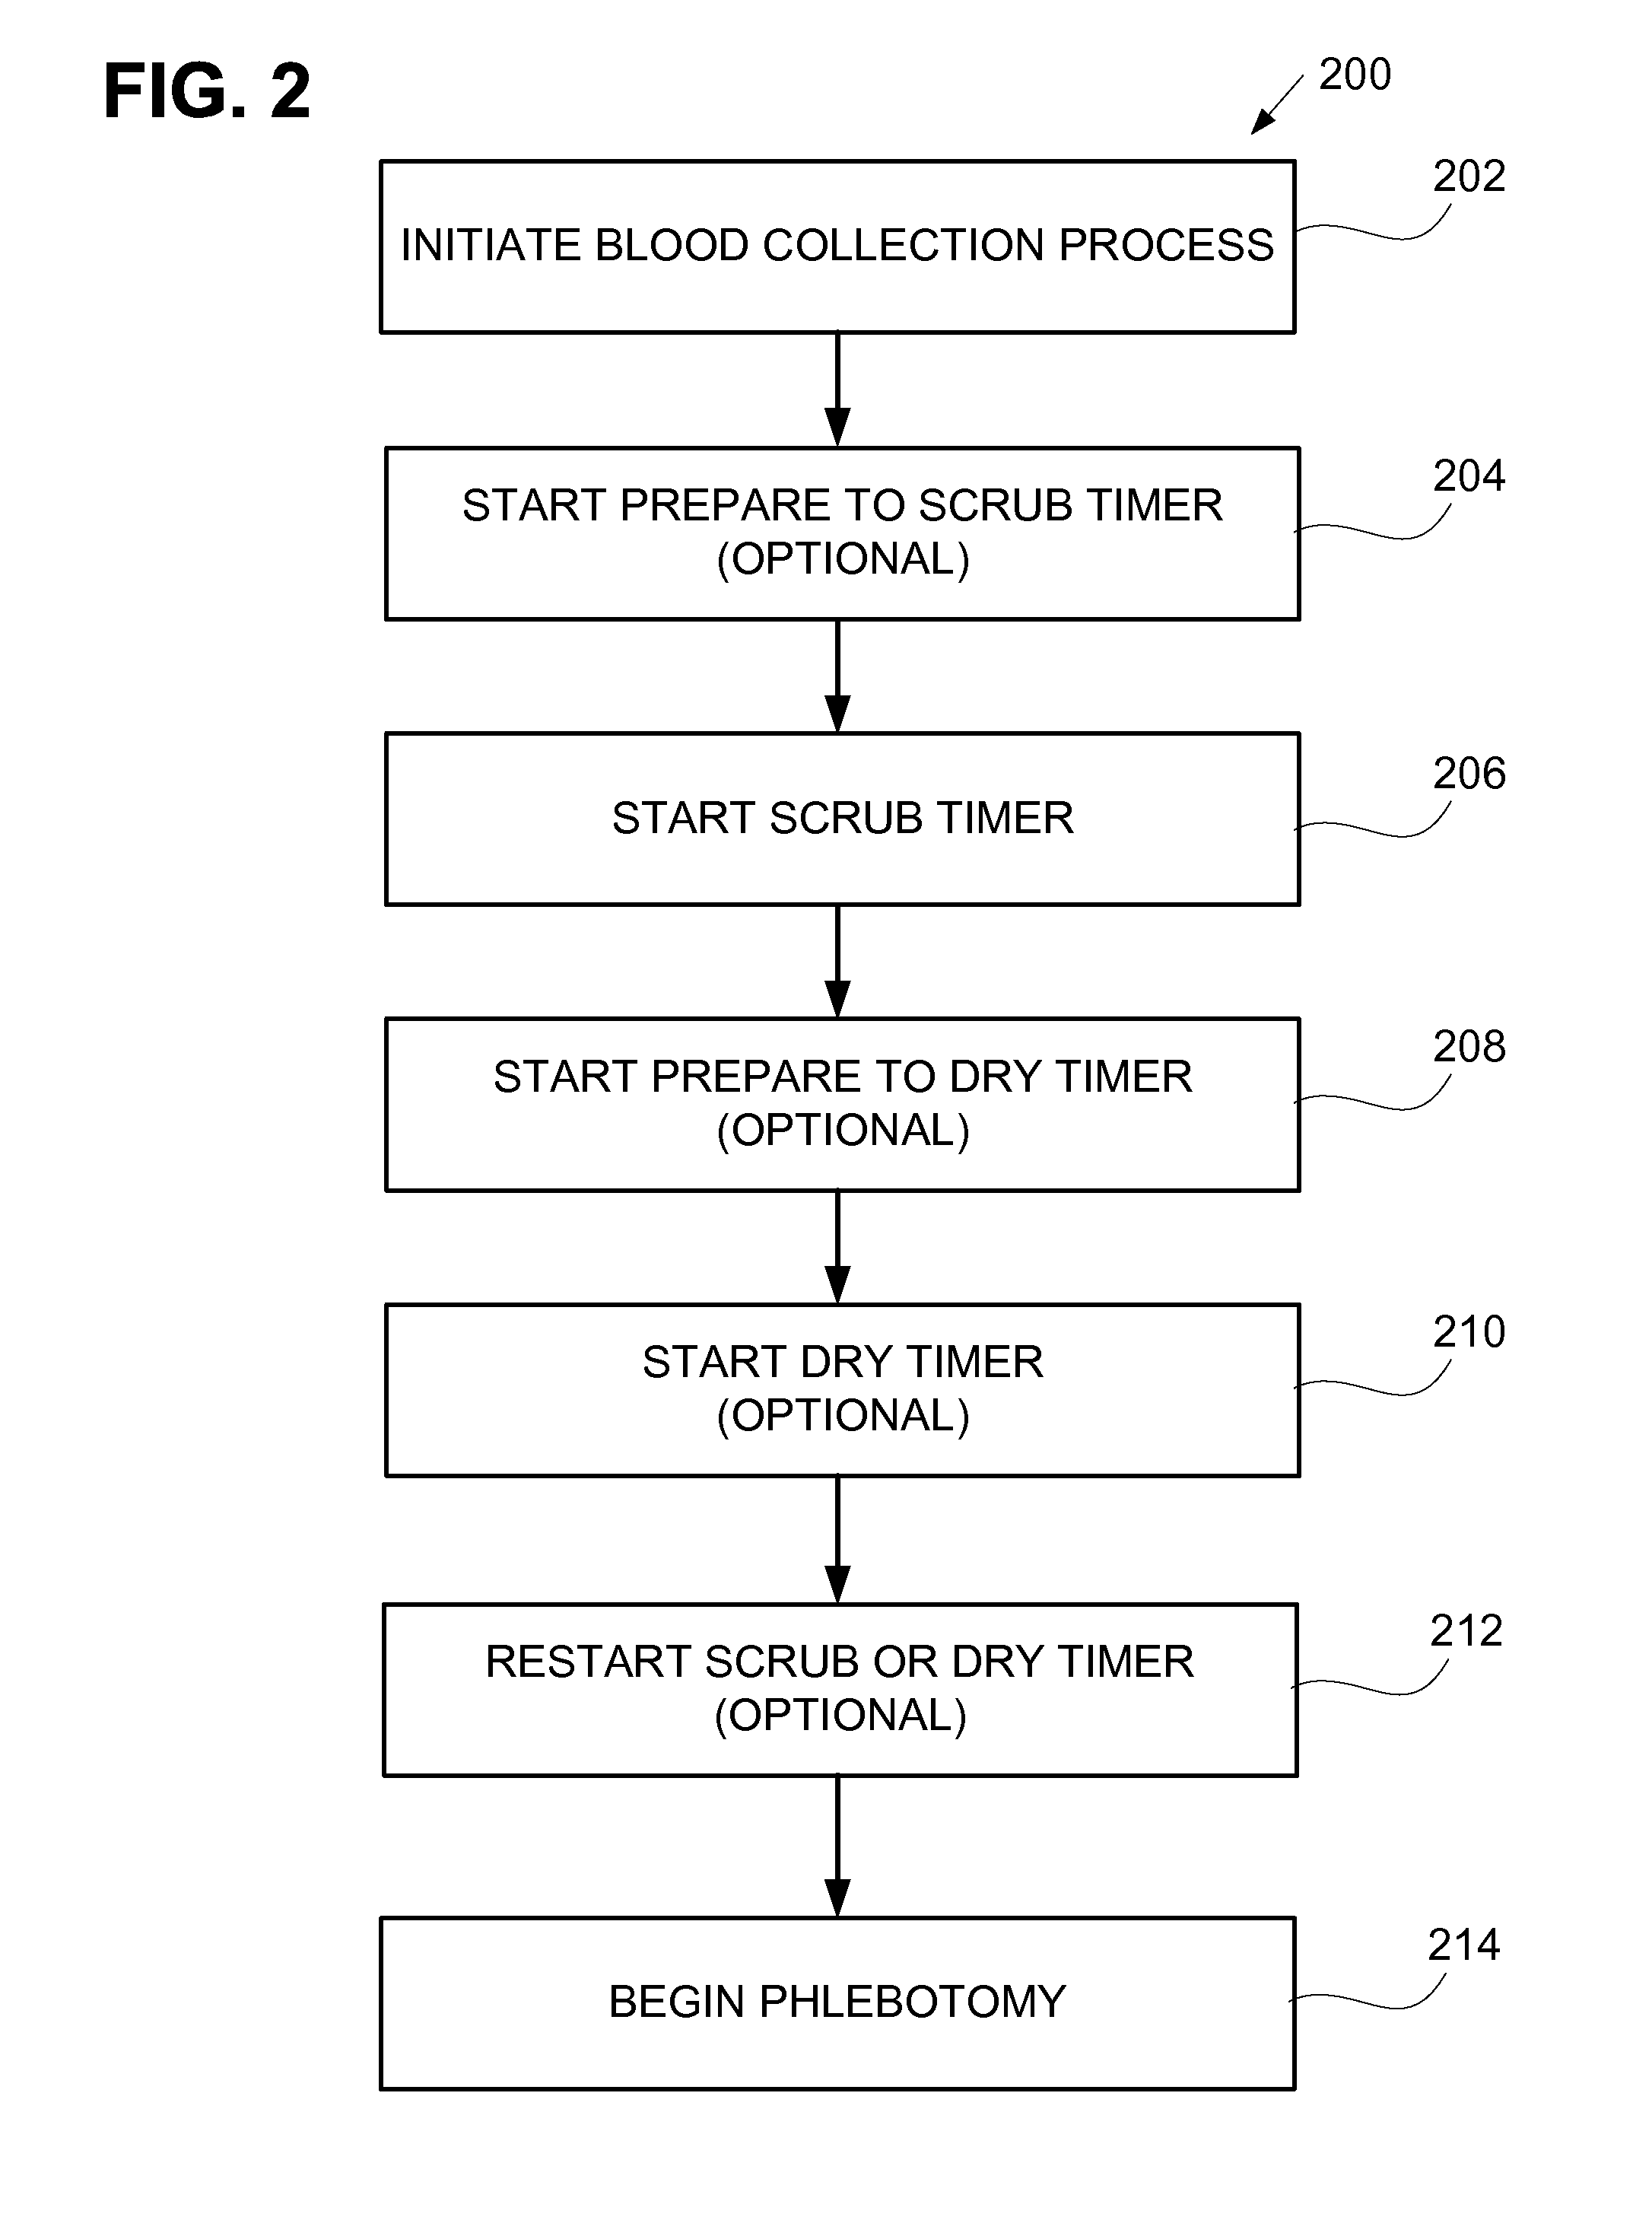 Systems and methods for managing blood donations